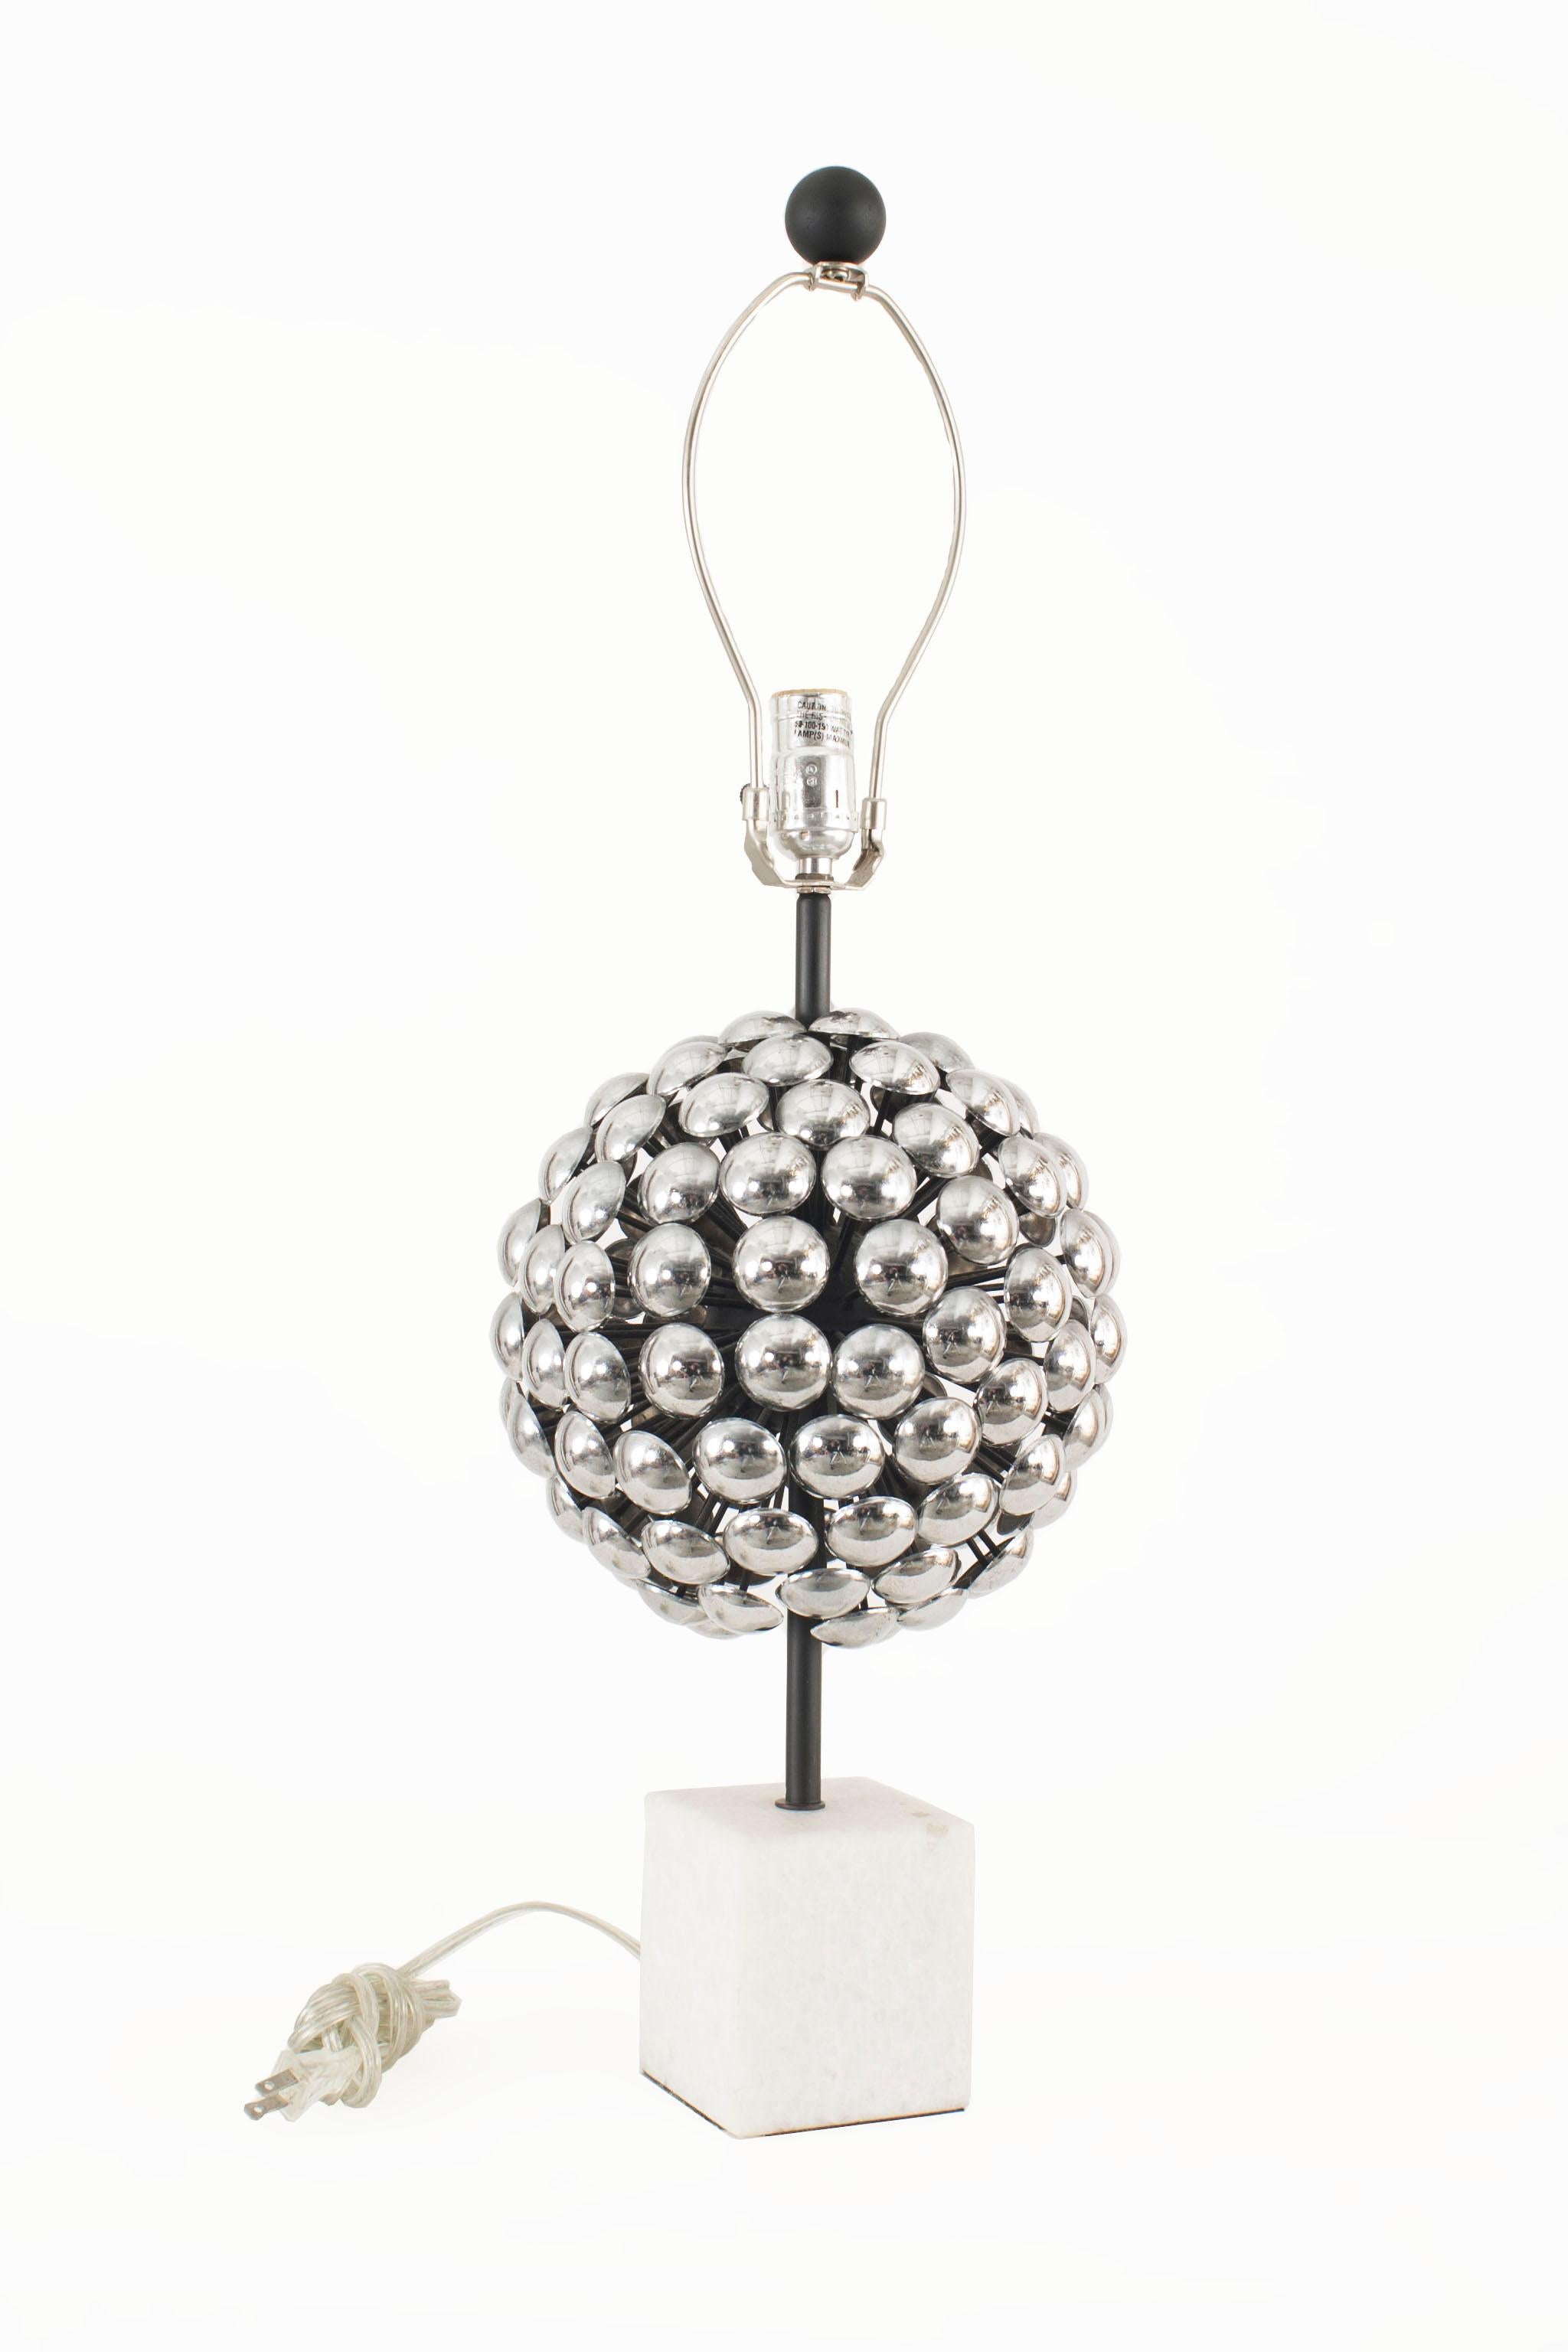 Pair of Post War Italian Silver Sphere Table Lamps In Good Condition For Sale In New York, NY